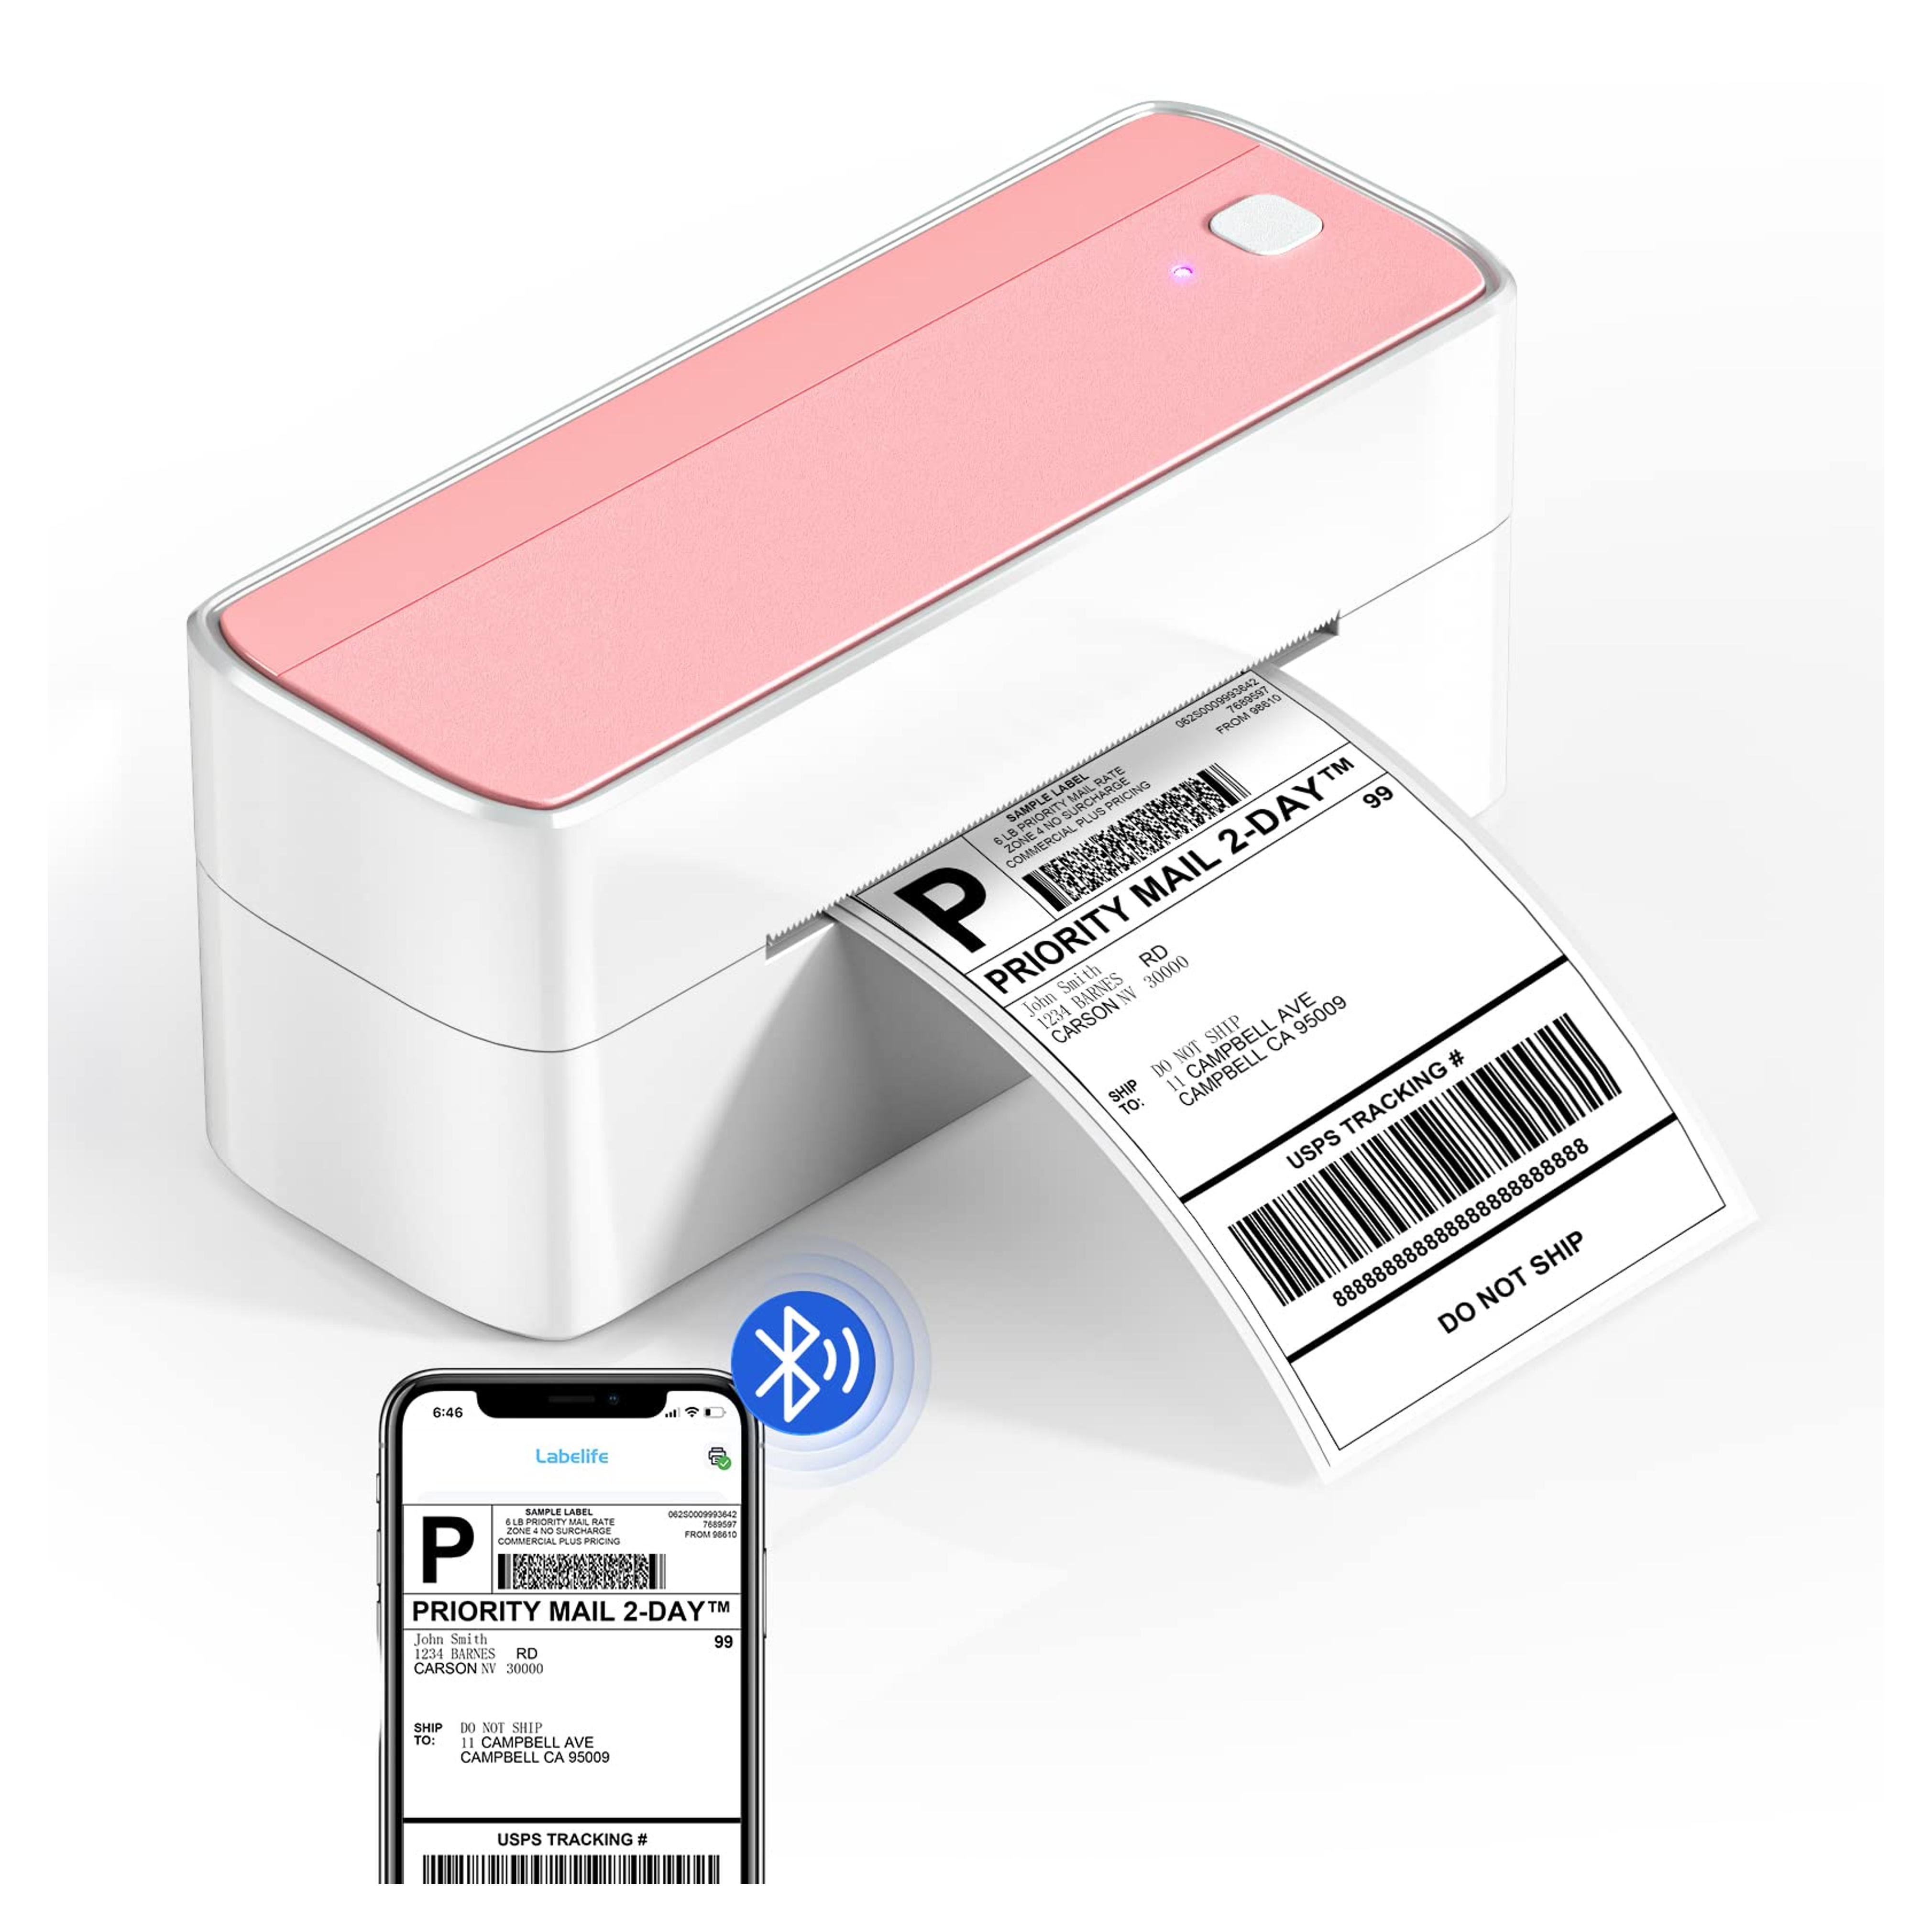 Bluetooth Shipping Label Printer - Itari Thermal Label Printer for Shipping Packages, Wireless Label Printer Support with iPad, iPhone and Android, Work for Amazon, Etsy, USPS, UPS, Shopify, Ebay